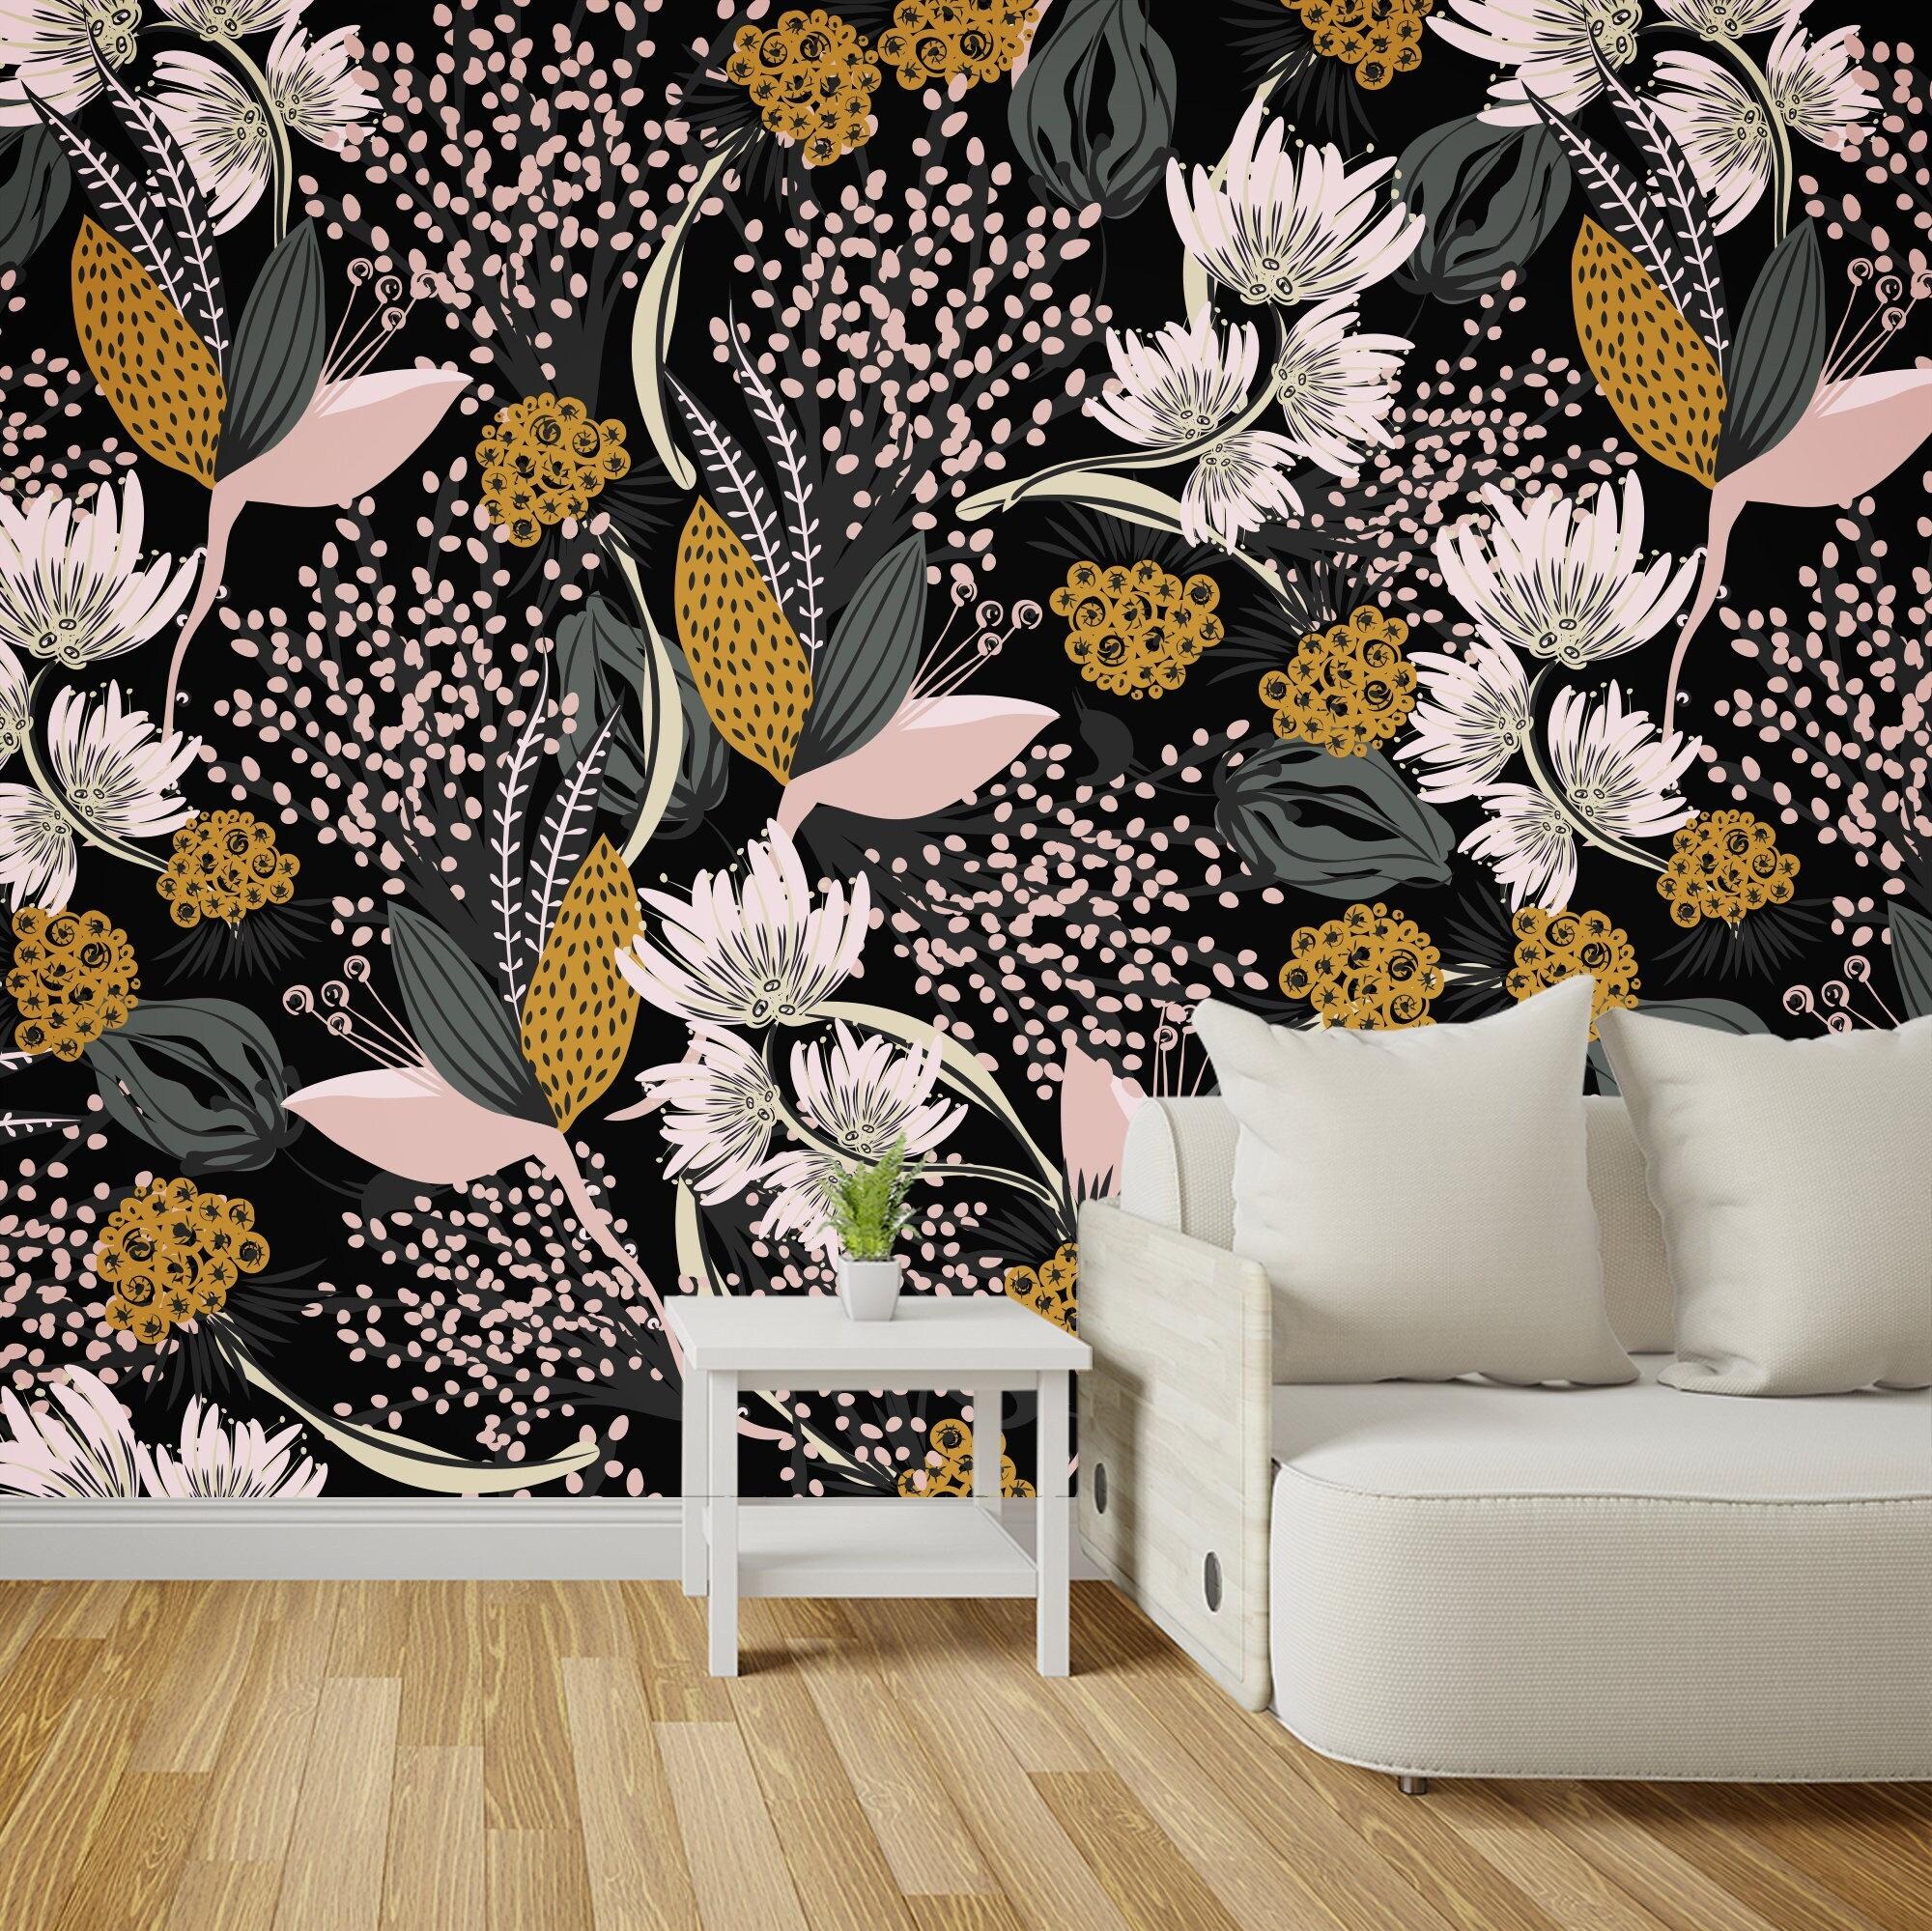 Floral Peel And Stick Wallpaper Removable Art Deco